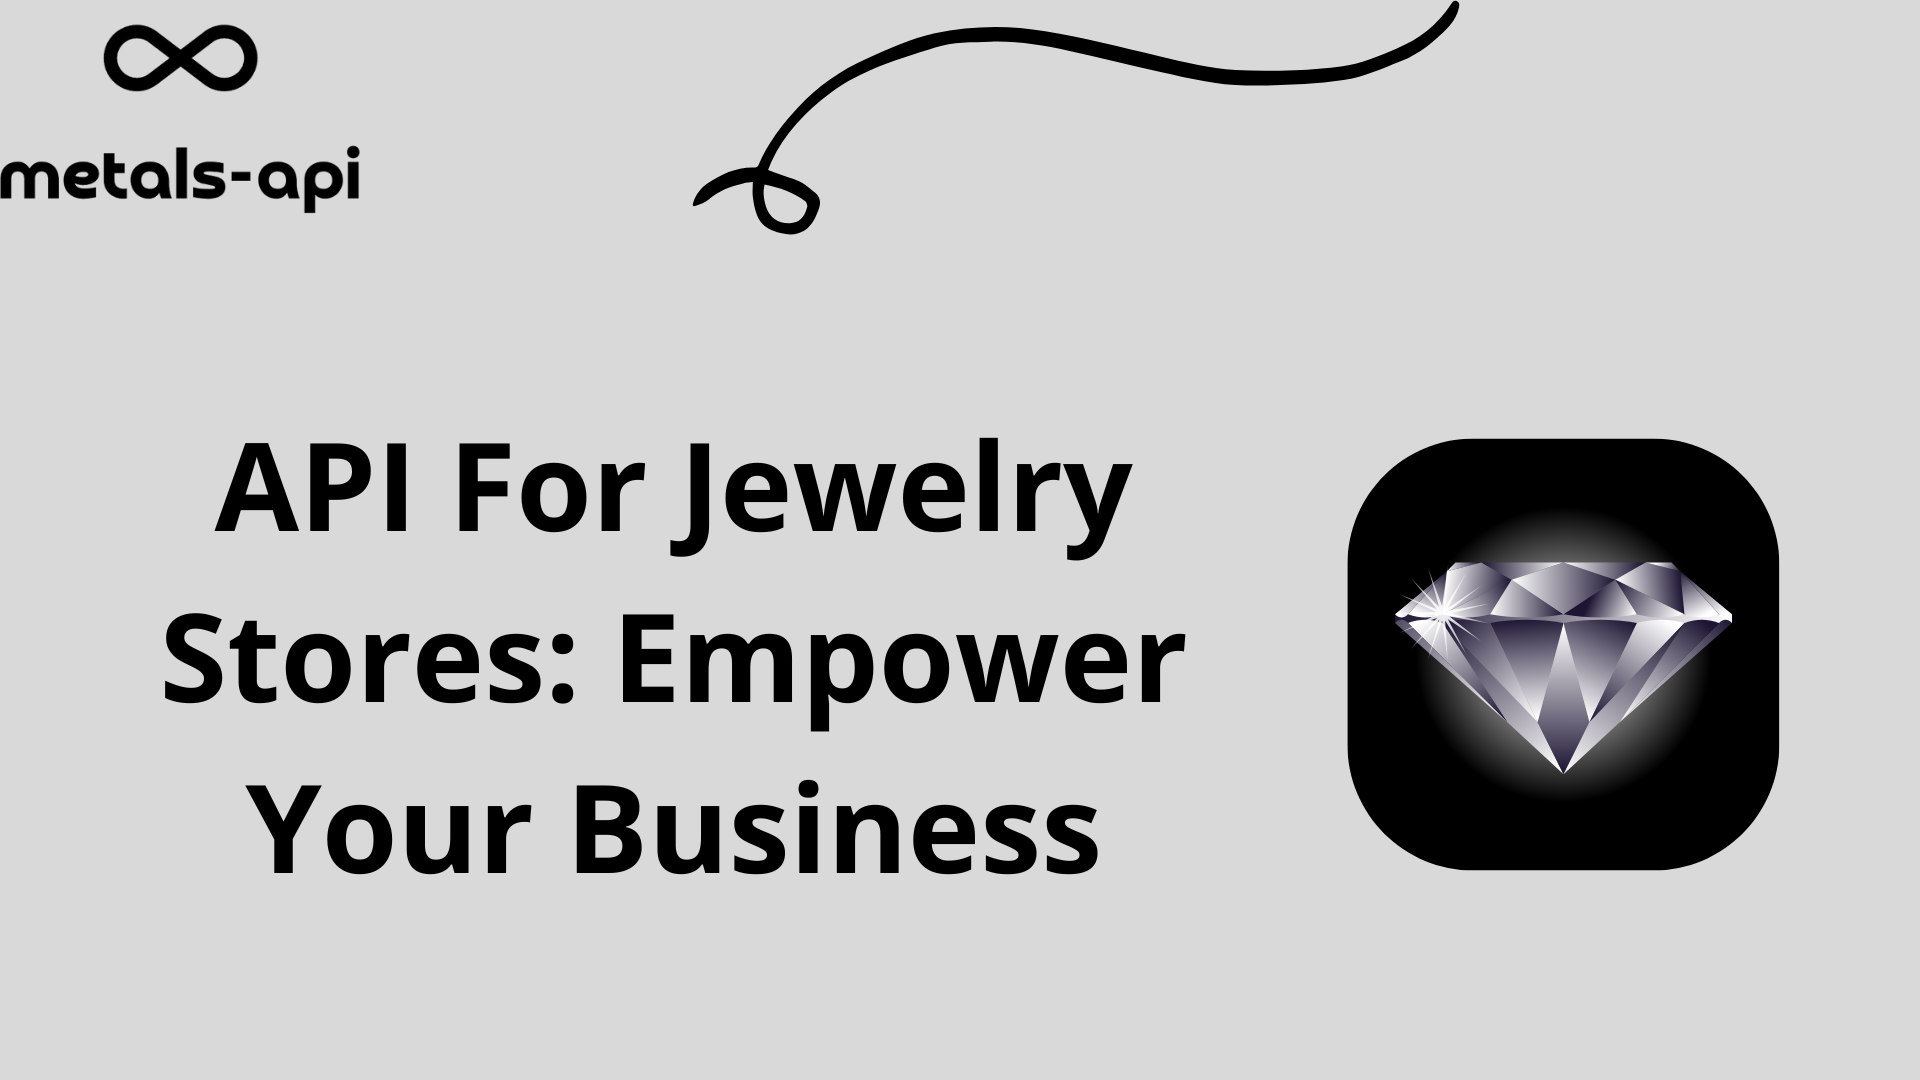 API For Jewelry Stores: Empower Your Business